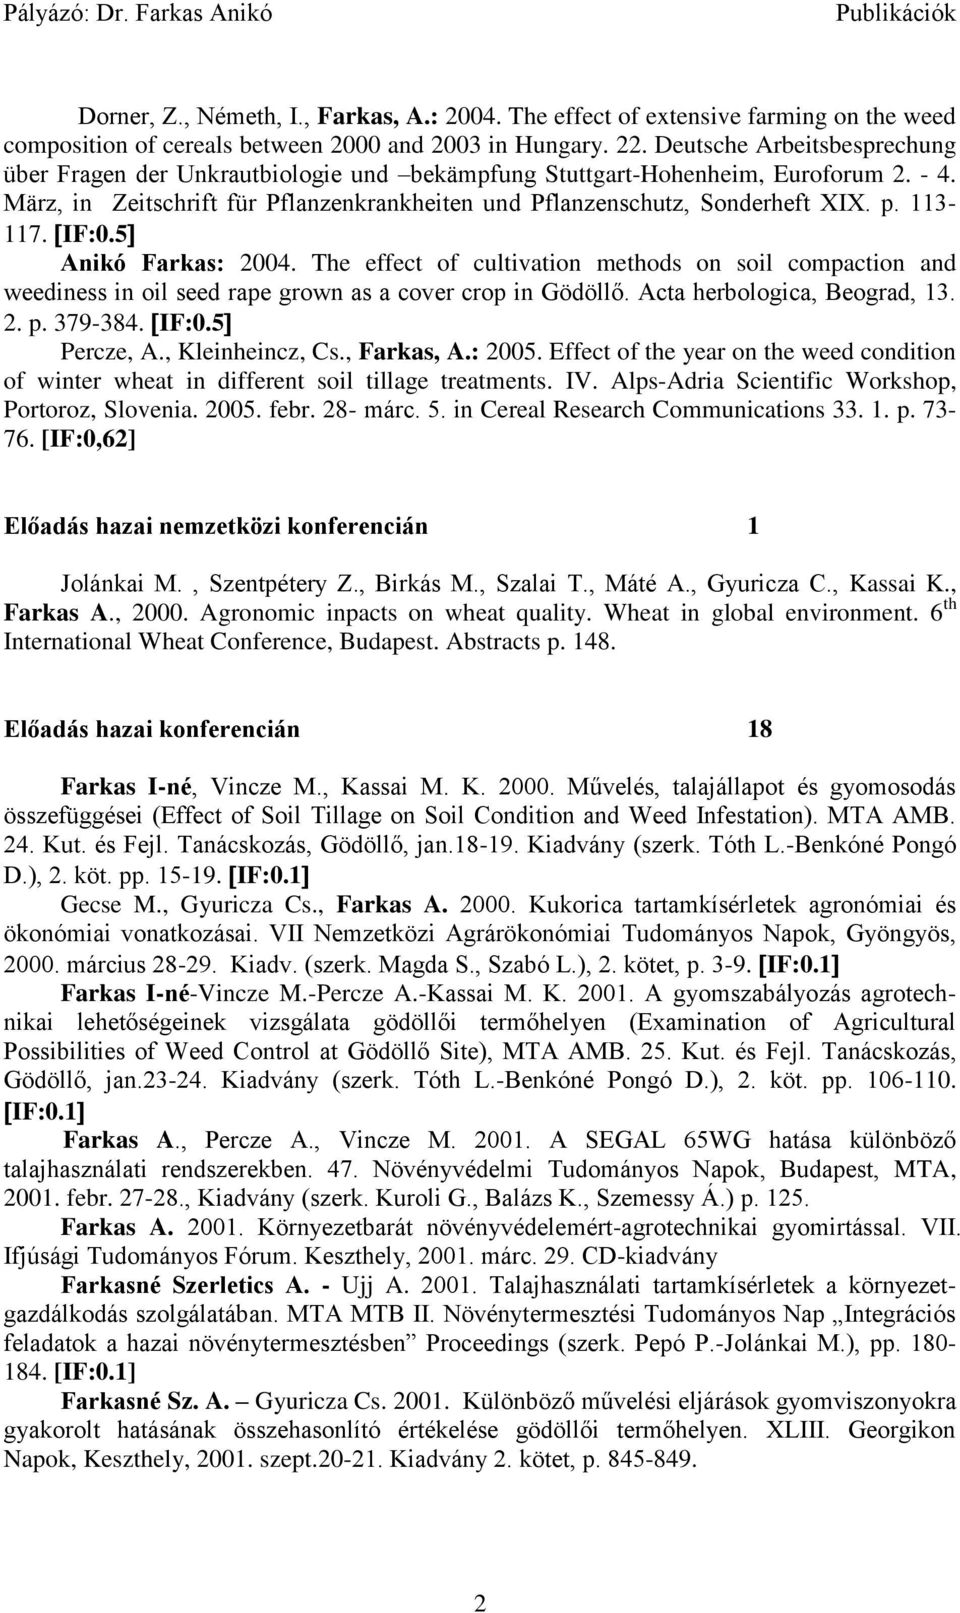 113-117. IF:0.5 Anikó Farkas: 2004. The effect of cultivation methods on soil compaction and weediness in oil seed rape grown as a cover crop in Gödöllő. Acta herbologica, Beograd, 13. 2. p. 379-384.